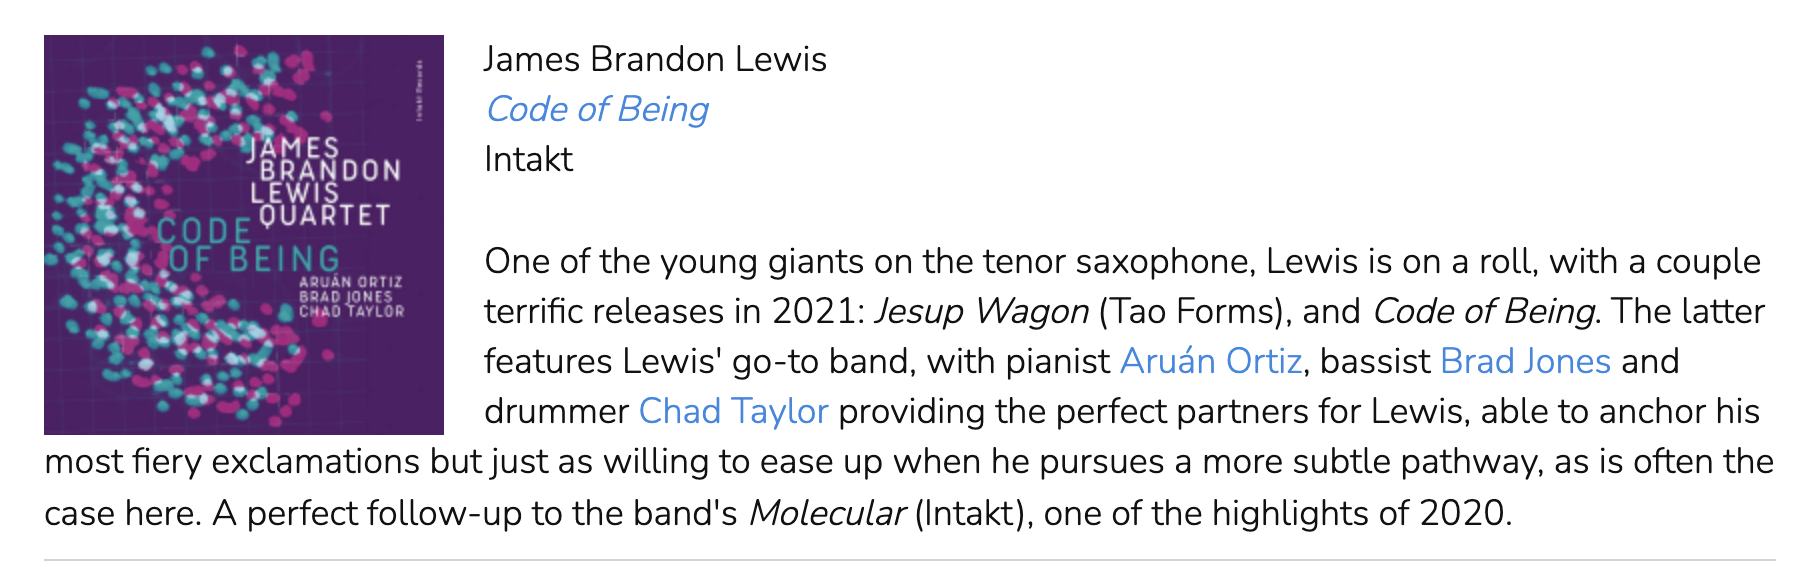 One of the young giants on the tenor saxophone, Lewis is on a roll, with a couple terrific releases in 2021: Jesup Wagon (Tao Forms), and Code of Being. The latter features Lewis' go-to band, with pianist Aruán Ortiz, bassist Brad Jones and drummer Chad Taylor providing the perfect partners for Lewis, able to anchor his most fiery exclamations but just as willing to ease up when he pursues a more subtle pathway, as is often the case here. A perfect follow-up to the band's Molecular (Intakt), one of the highlights of 2020.